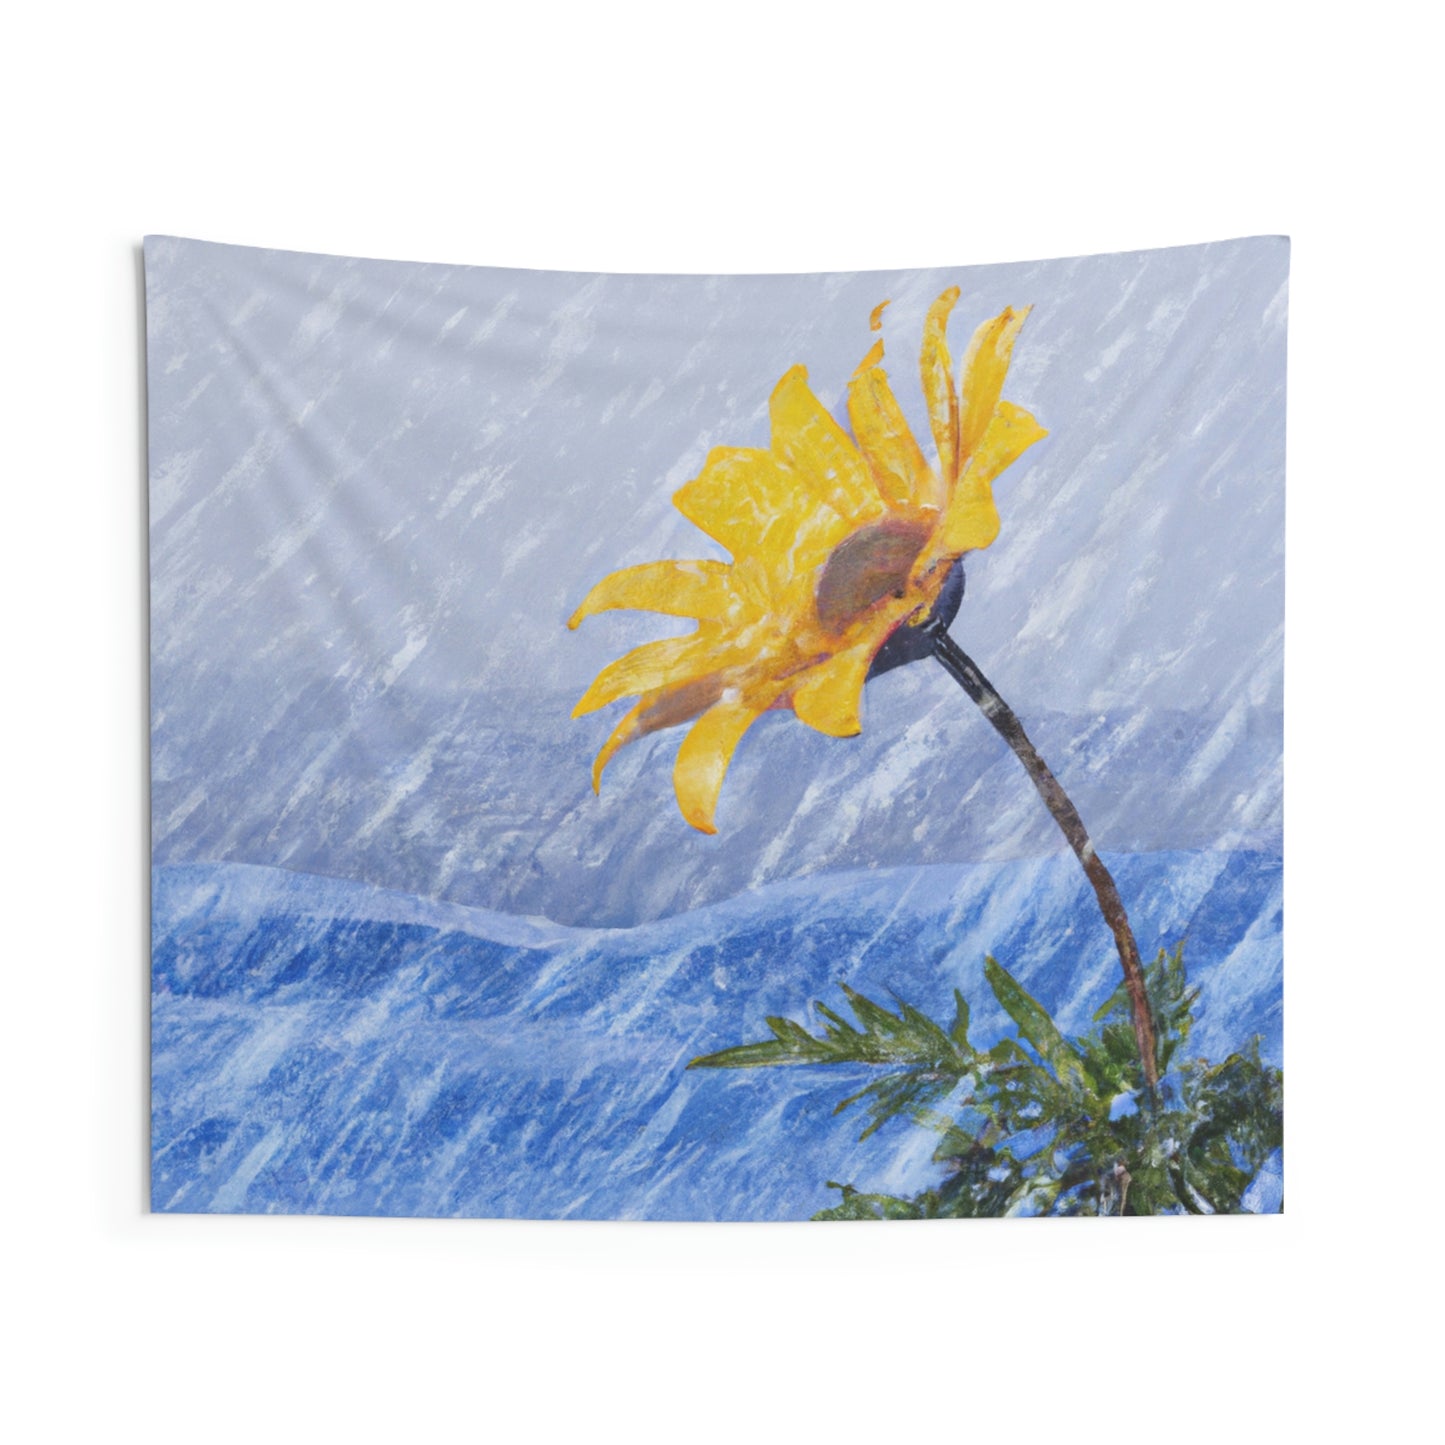 "A Burst of Color in the Glistening White: The Miracle of a Flower Blooms in a Snowstorm" - The Alien Wall Tapestries